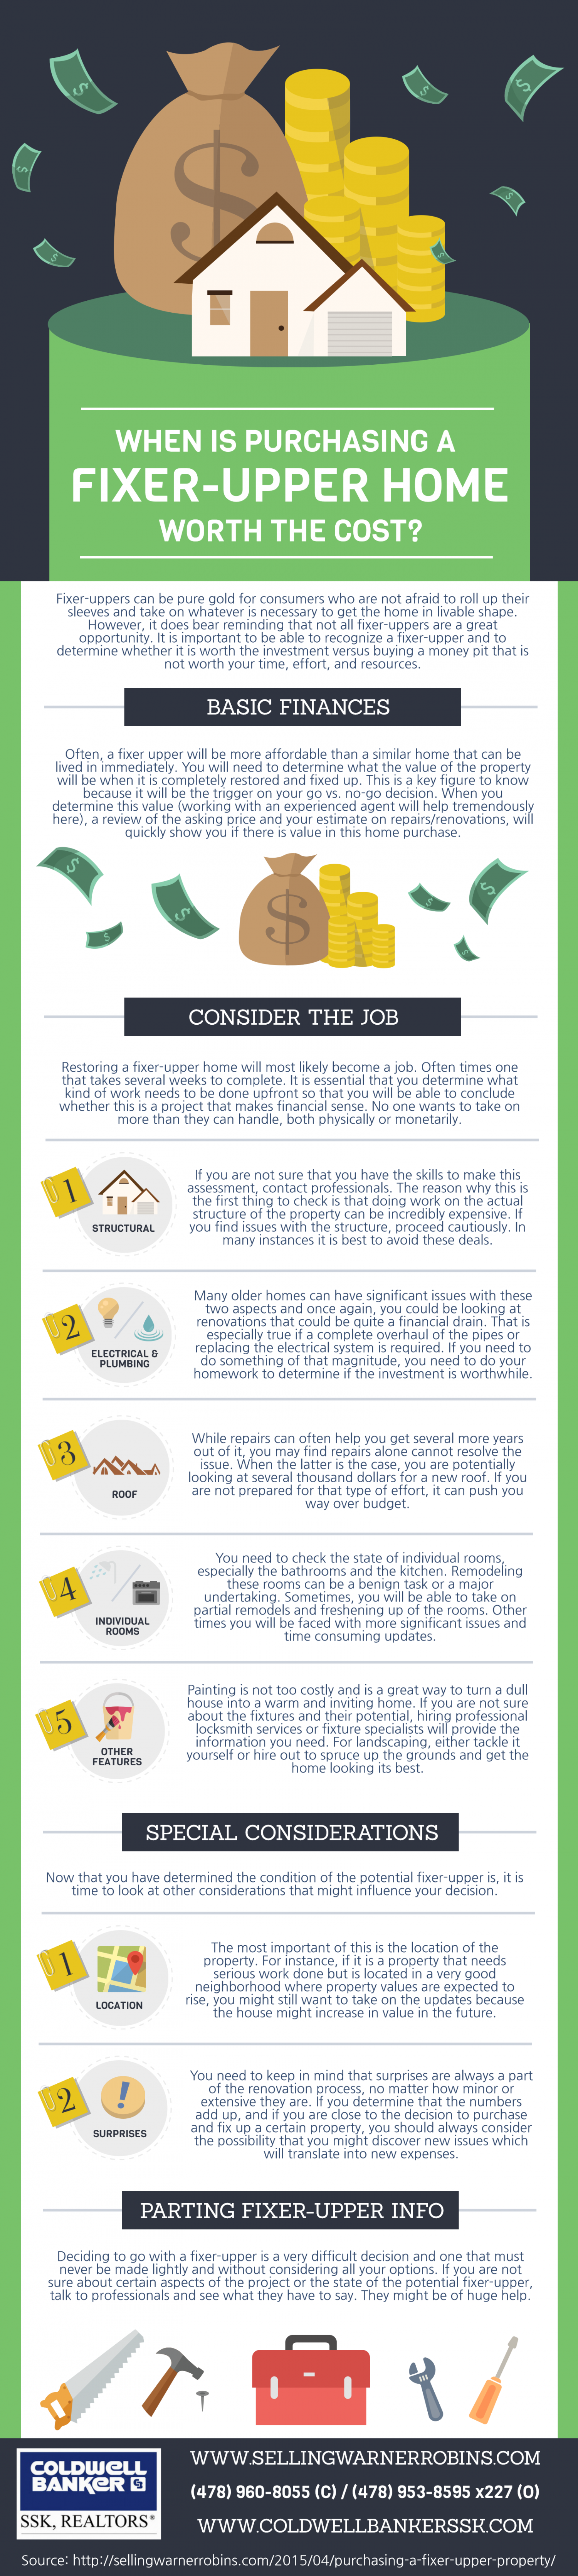 When is Purchasing a Fixer-Upper Home Worth the Cost? Infographic